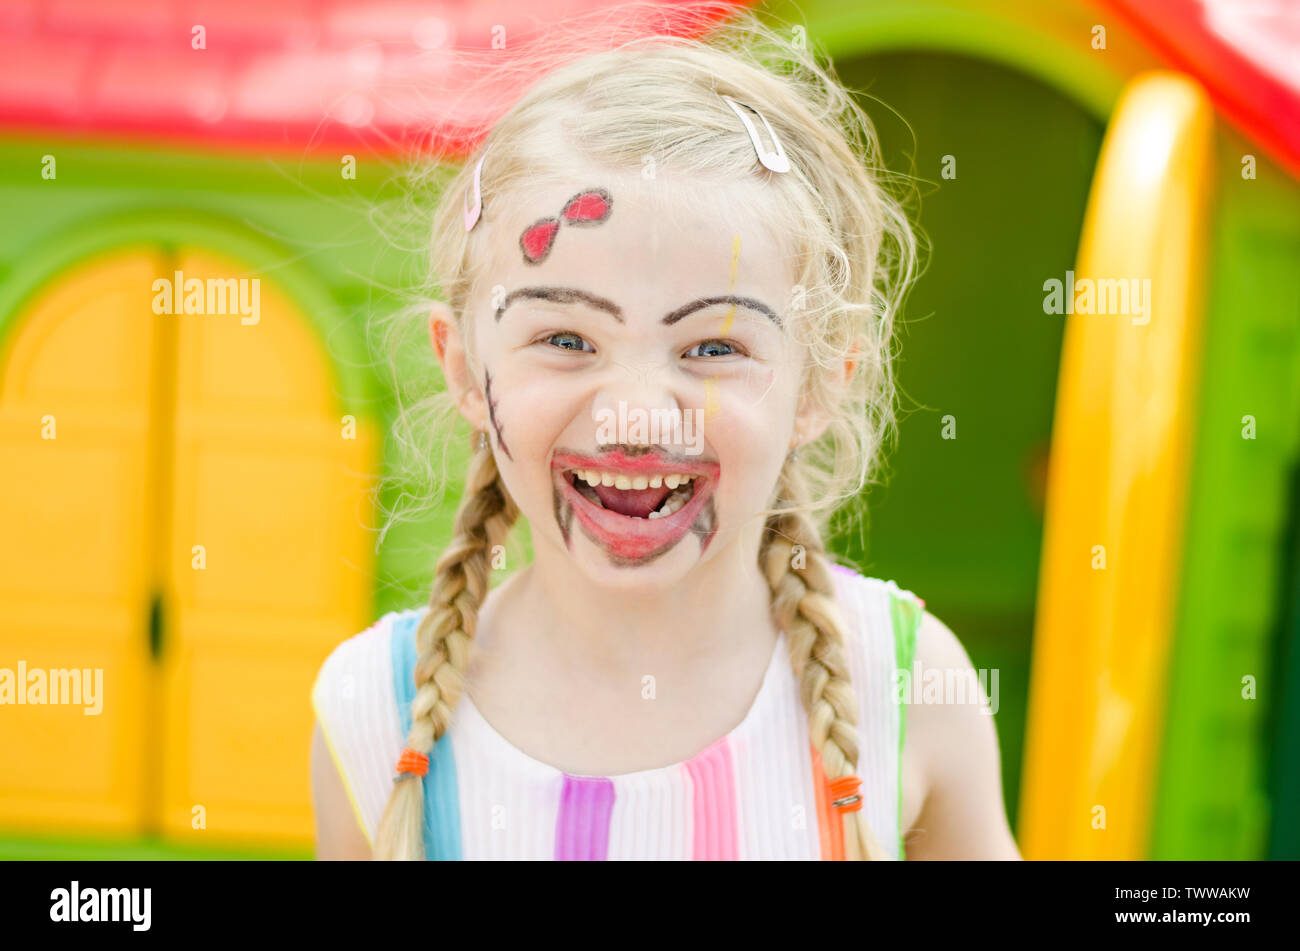 happy eautiful blond girl with colorful facepainting Stock Photo